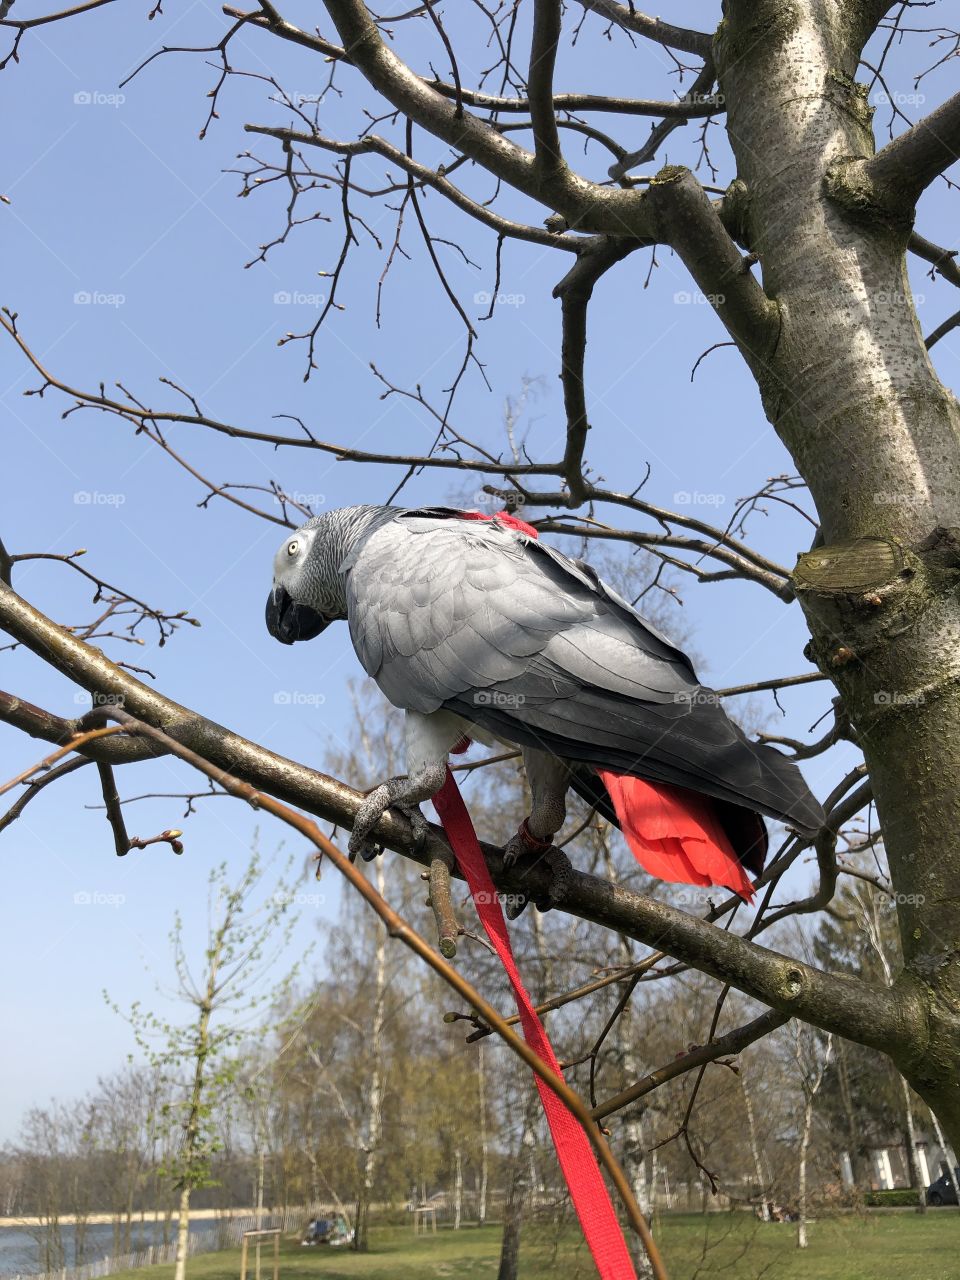 Parrot in a tree 